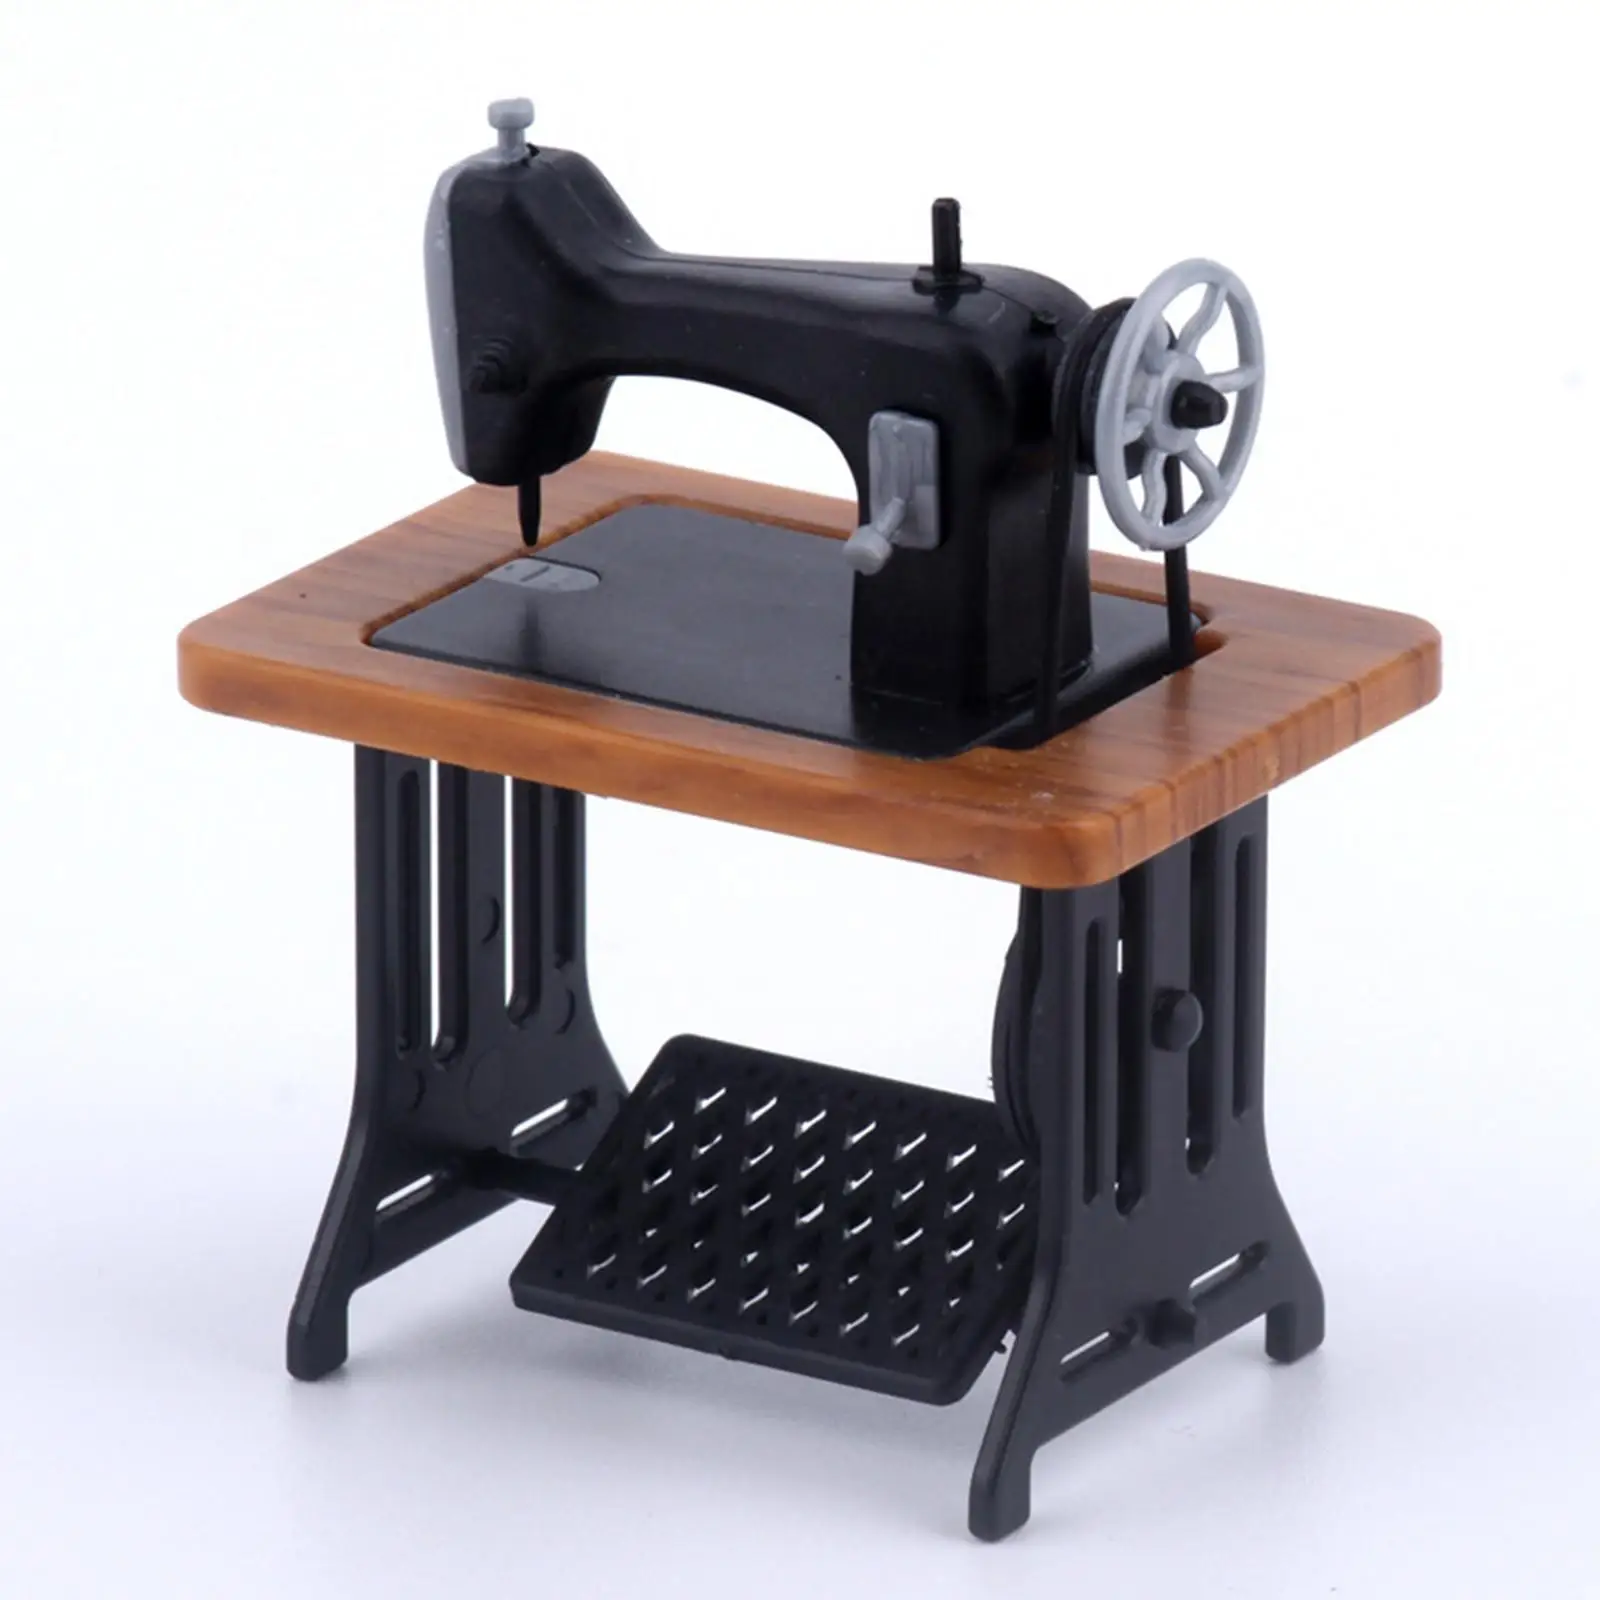 Dollhouse Furniture Sewing Machine Tailor Toy, Decorative Pretend Toy, 1:12 Kids Gift Doll Home Life Scene for Girls Children